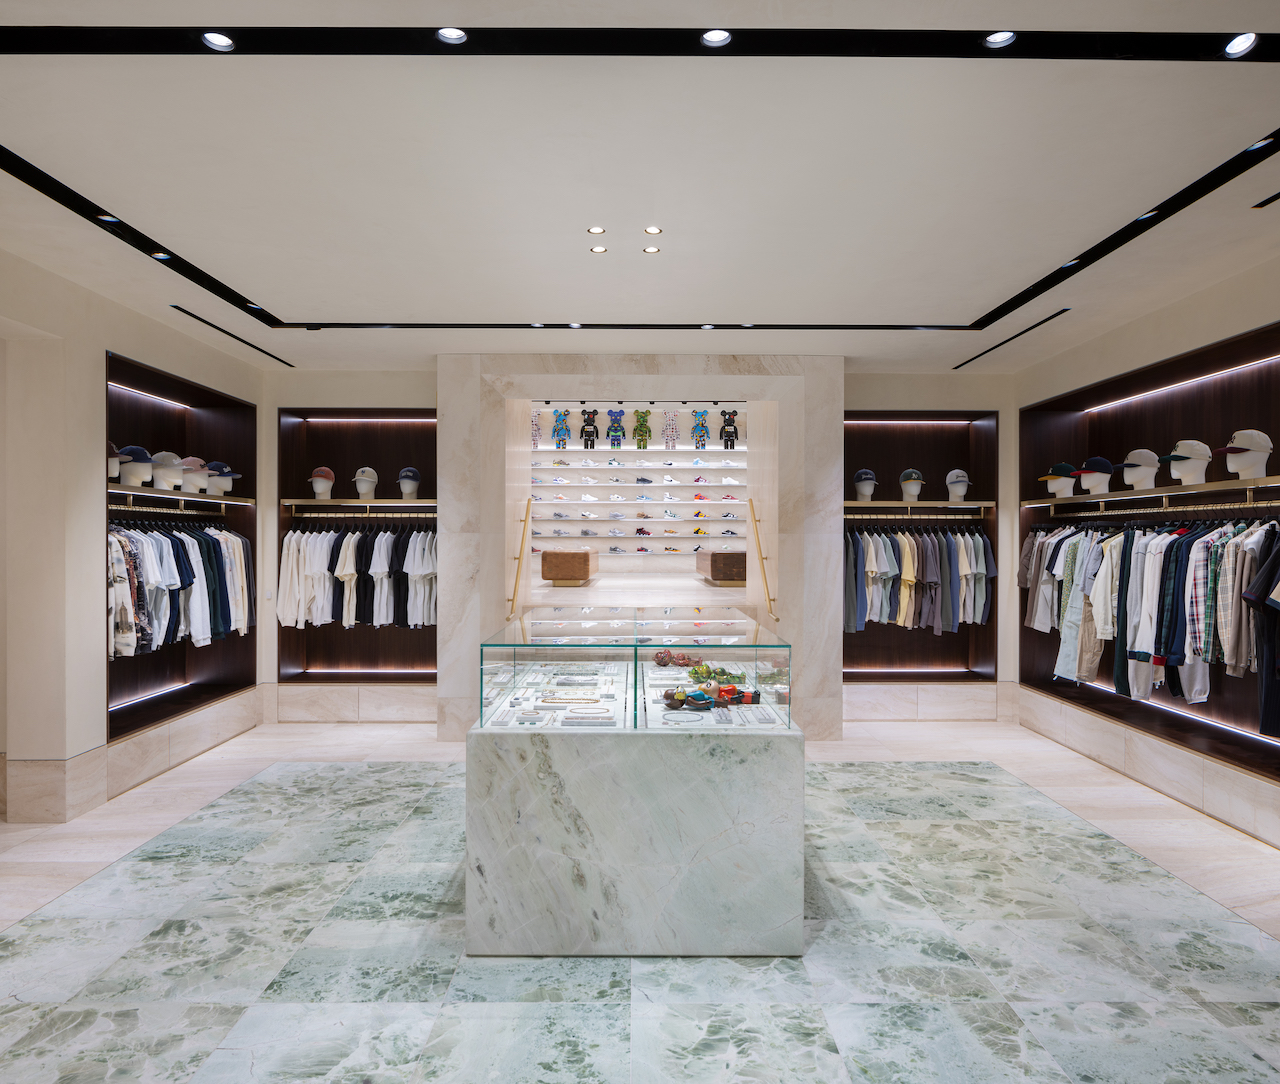 Kith Opens New Los Angeles Flagship Store on Rodeo Drive